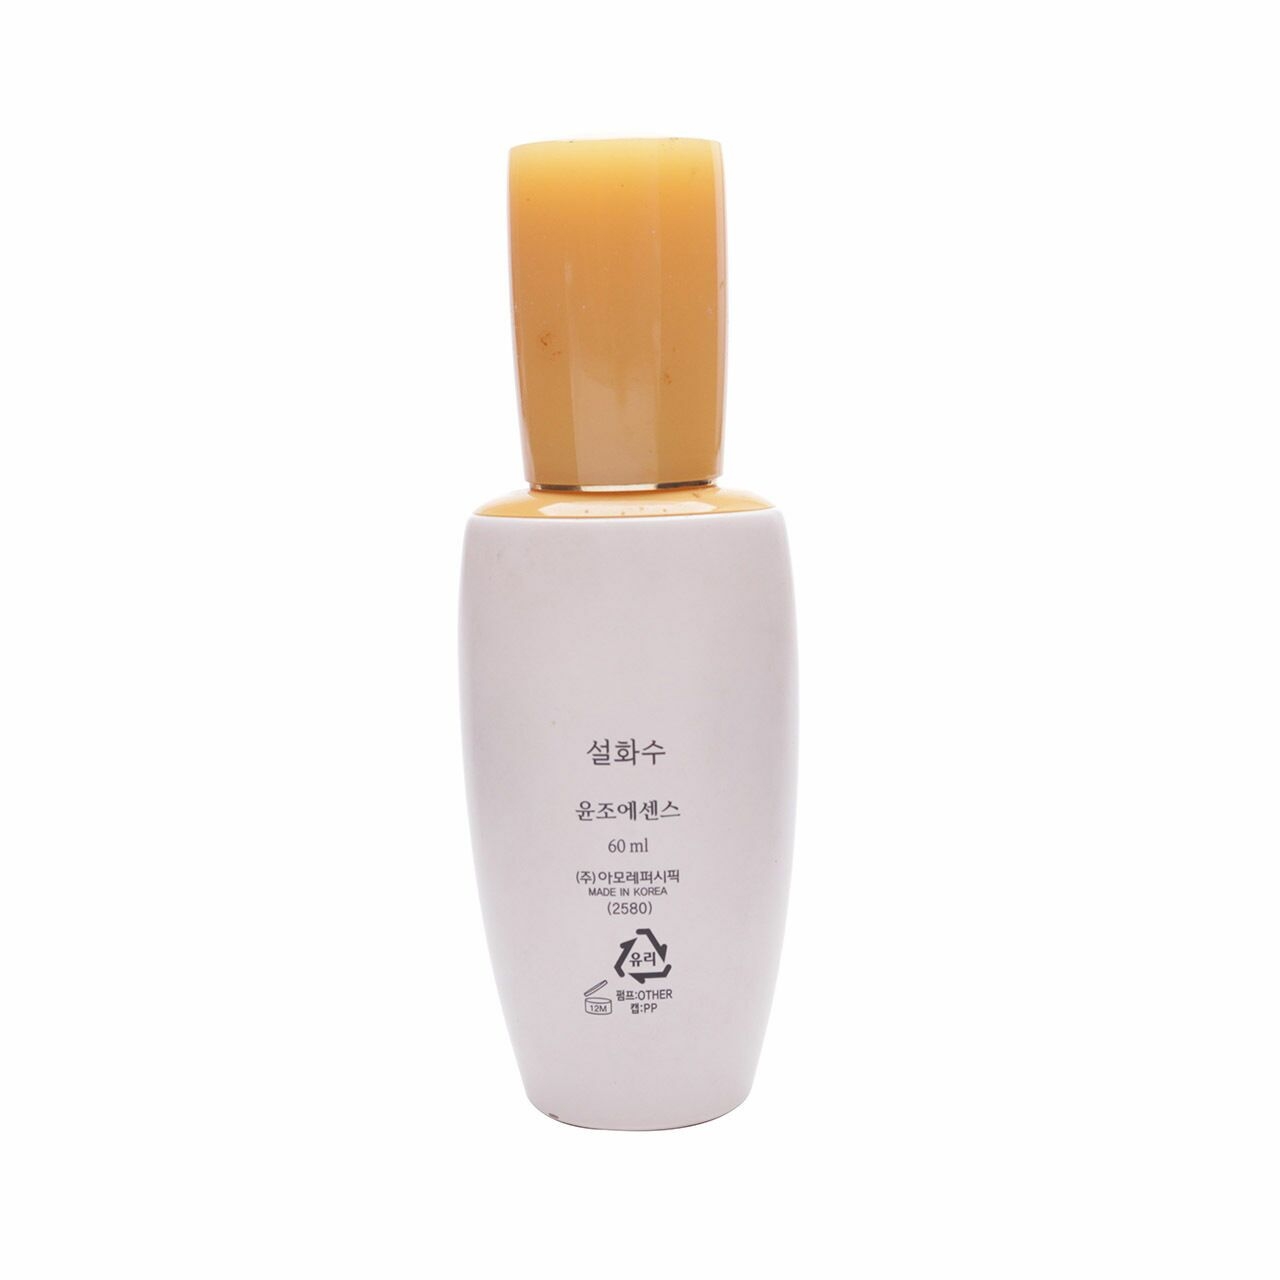 Sulwhasoo First Care Activating Serum Ex Skin Care